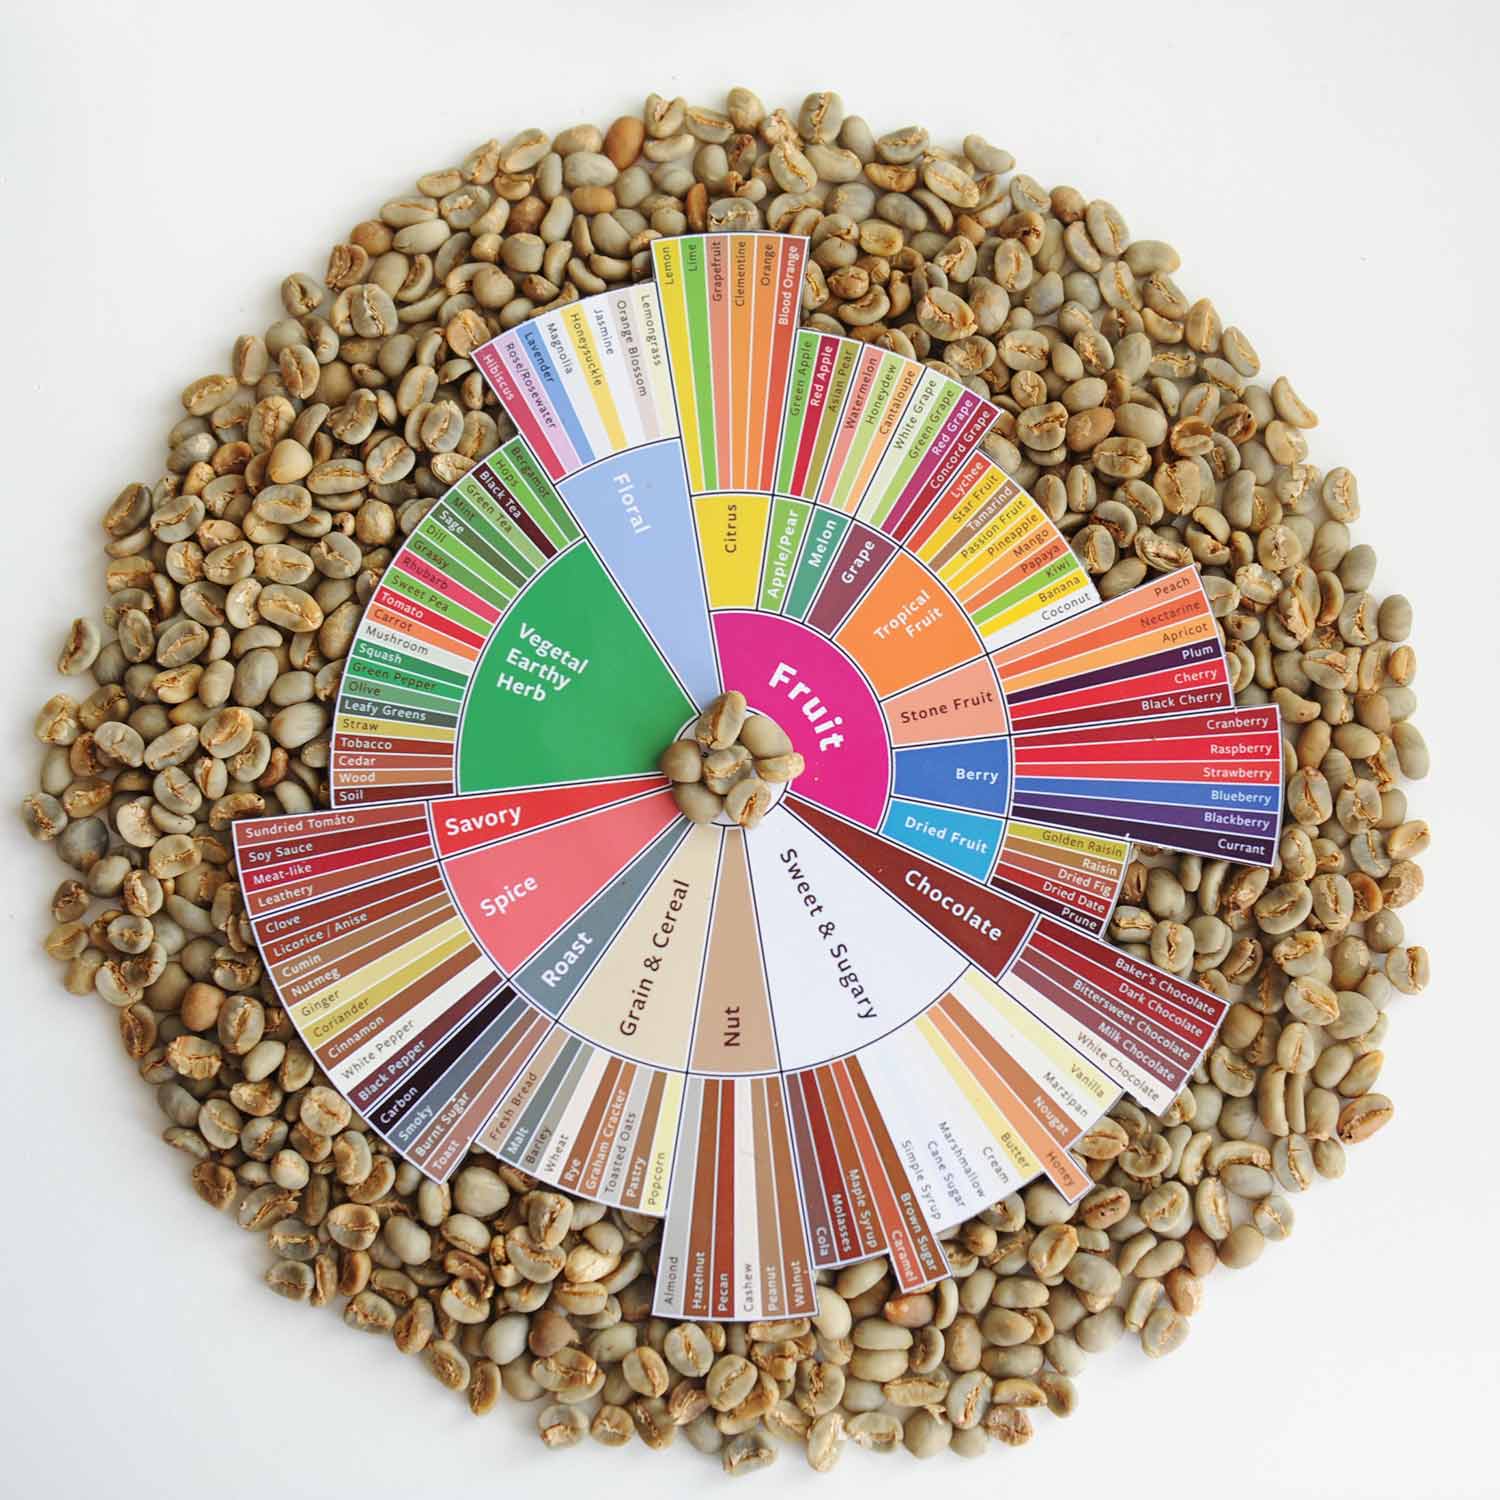 A coffee flavor wheel showing different flavors and tastes on a bed of coffee beans.